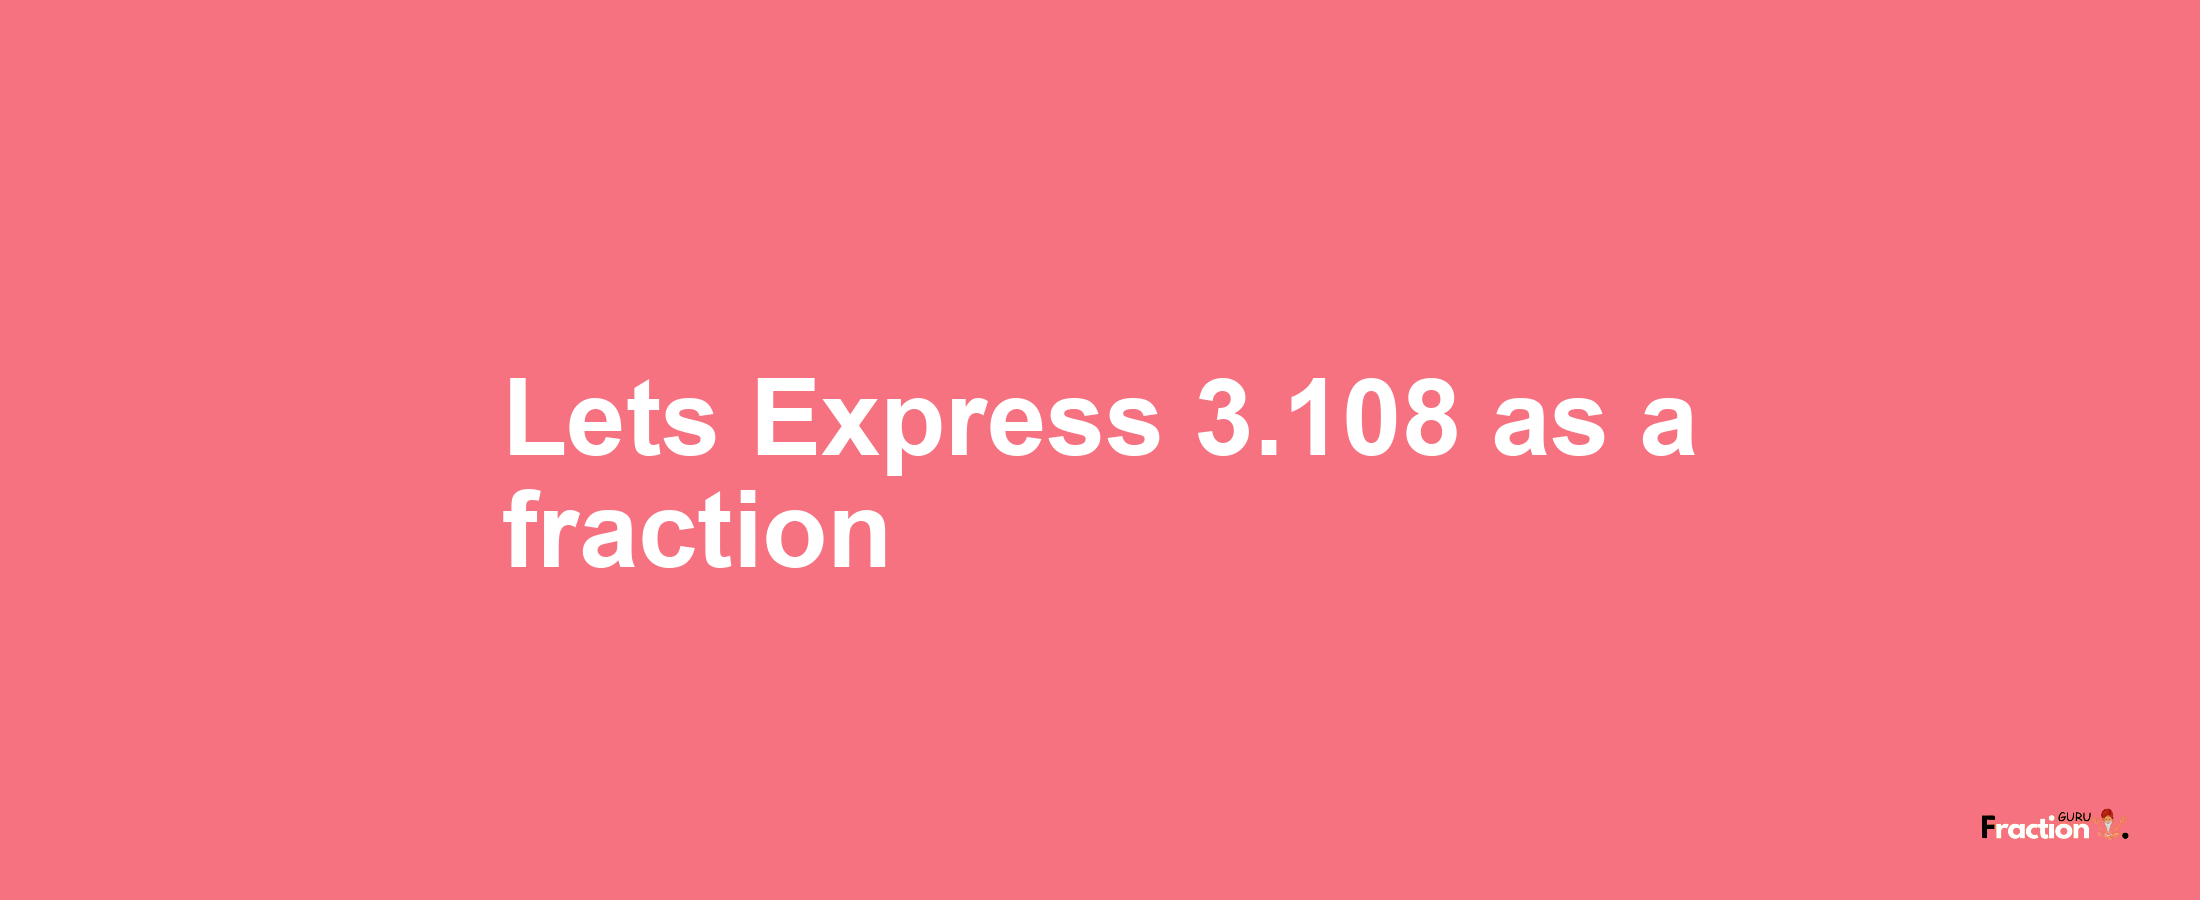 Lets Express 3.108 as afraction